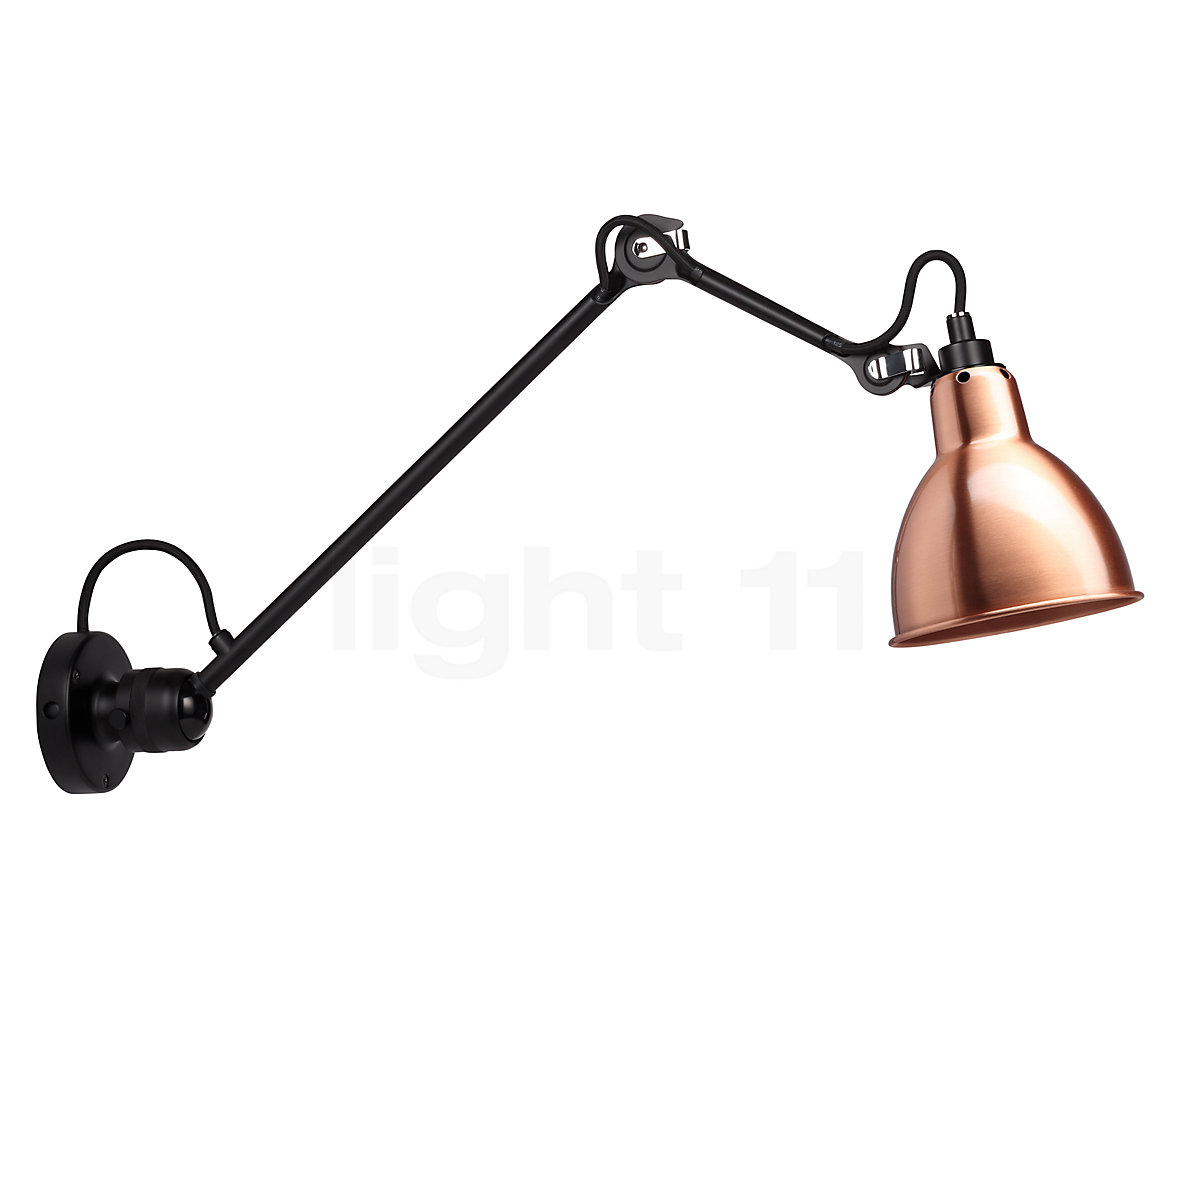 Buy DCW Lampe L 40 Wall light at